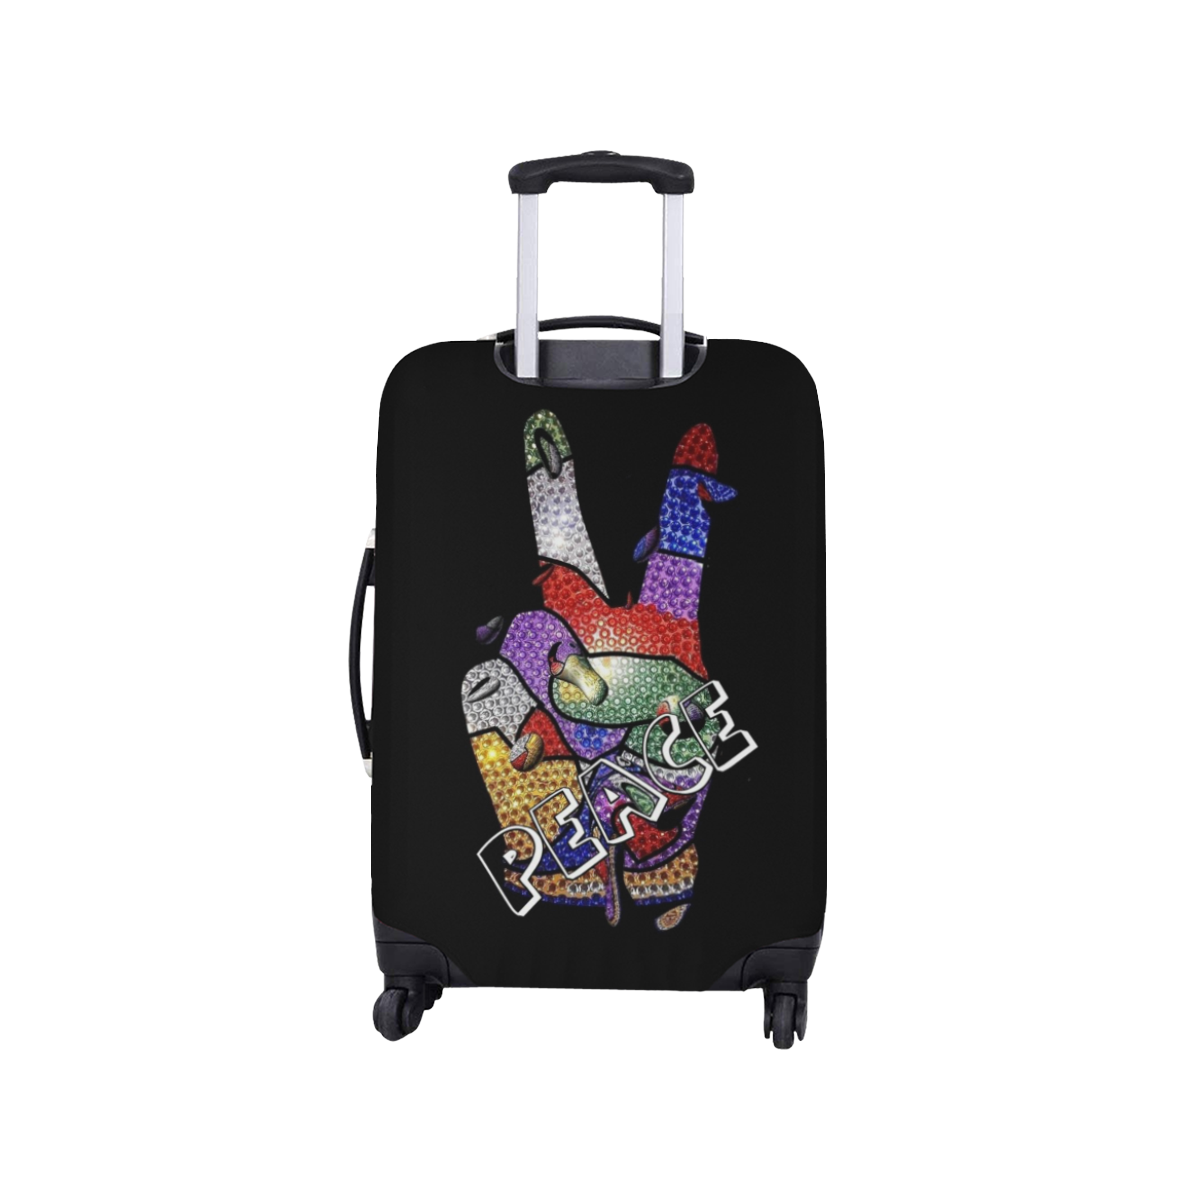 Glitter Peace by Nico Bielow Luggage Cover/Small 18"-21"